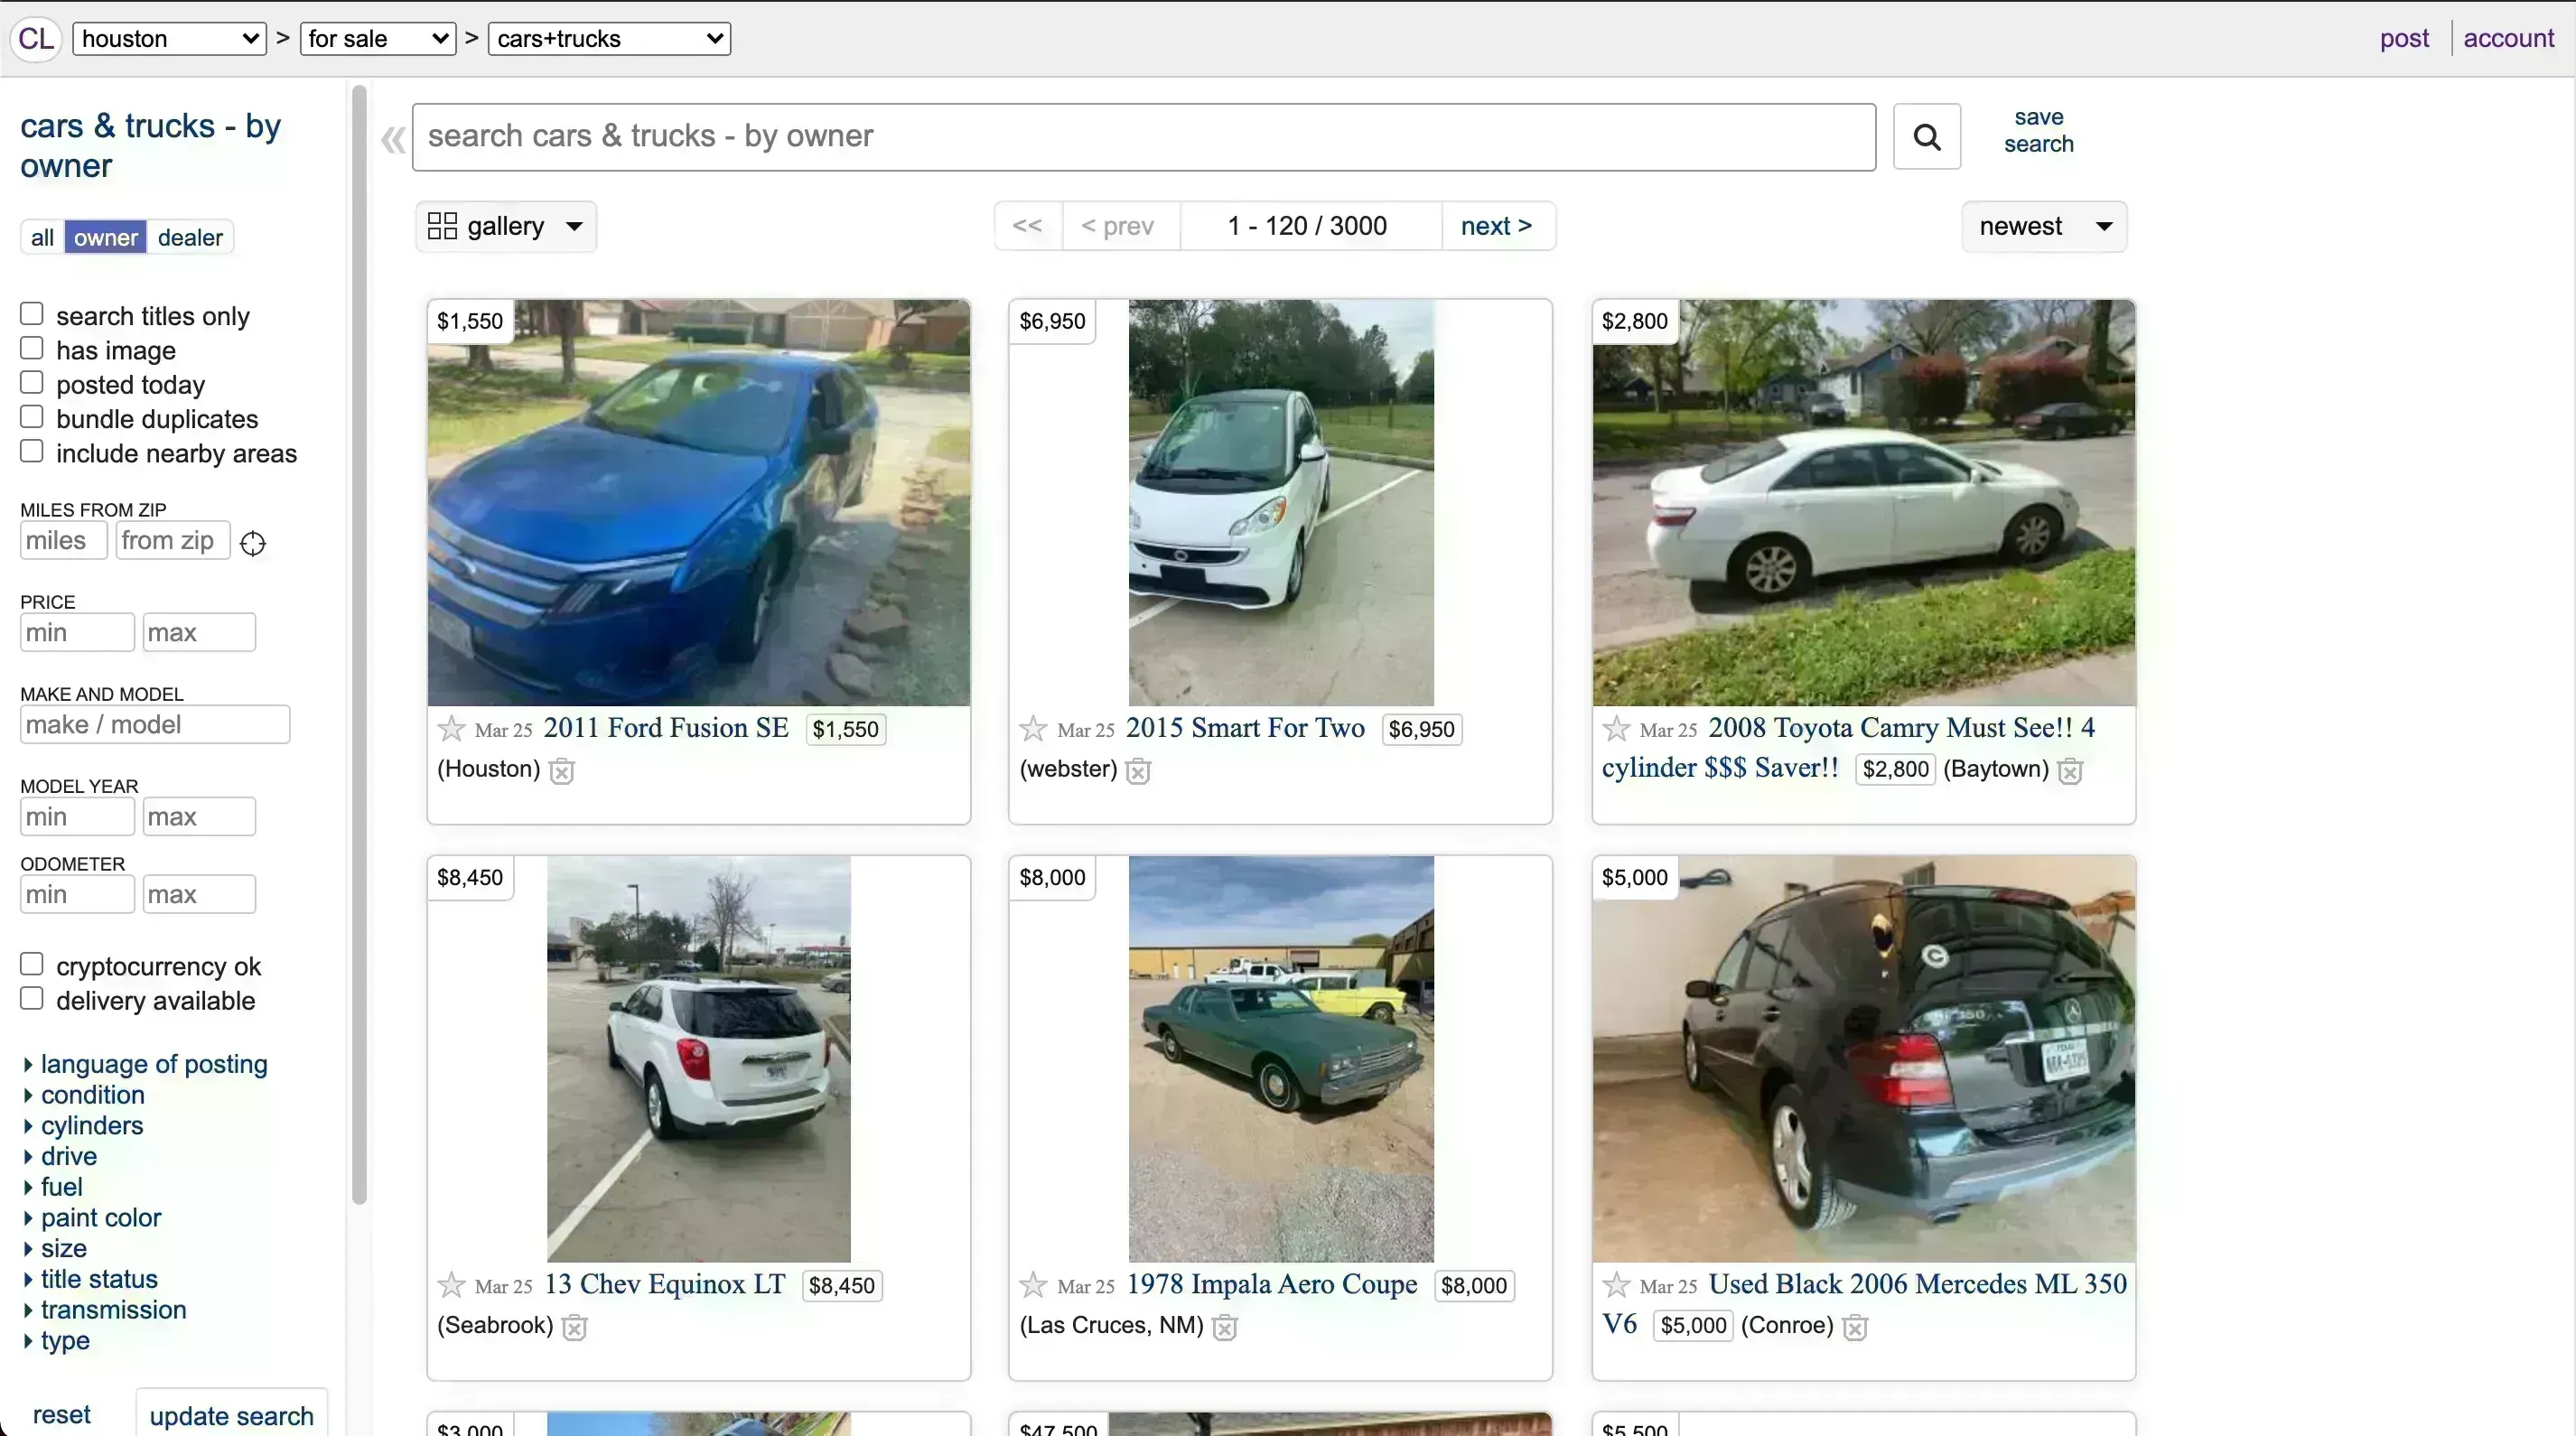 brian ahrendt recommends Craigslist Iowa Cars And Trucks